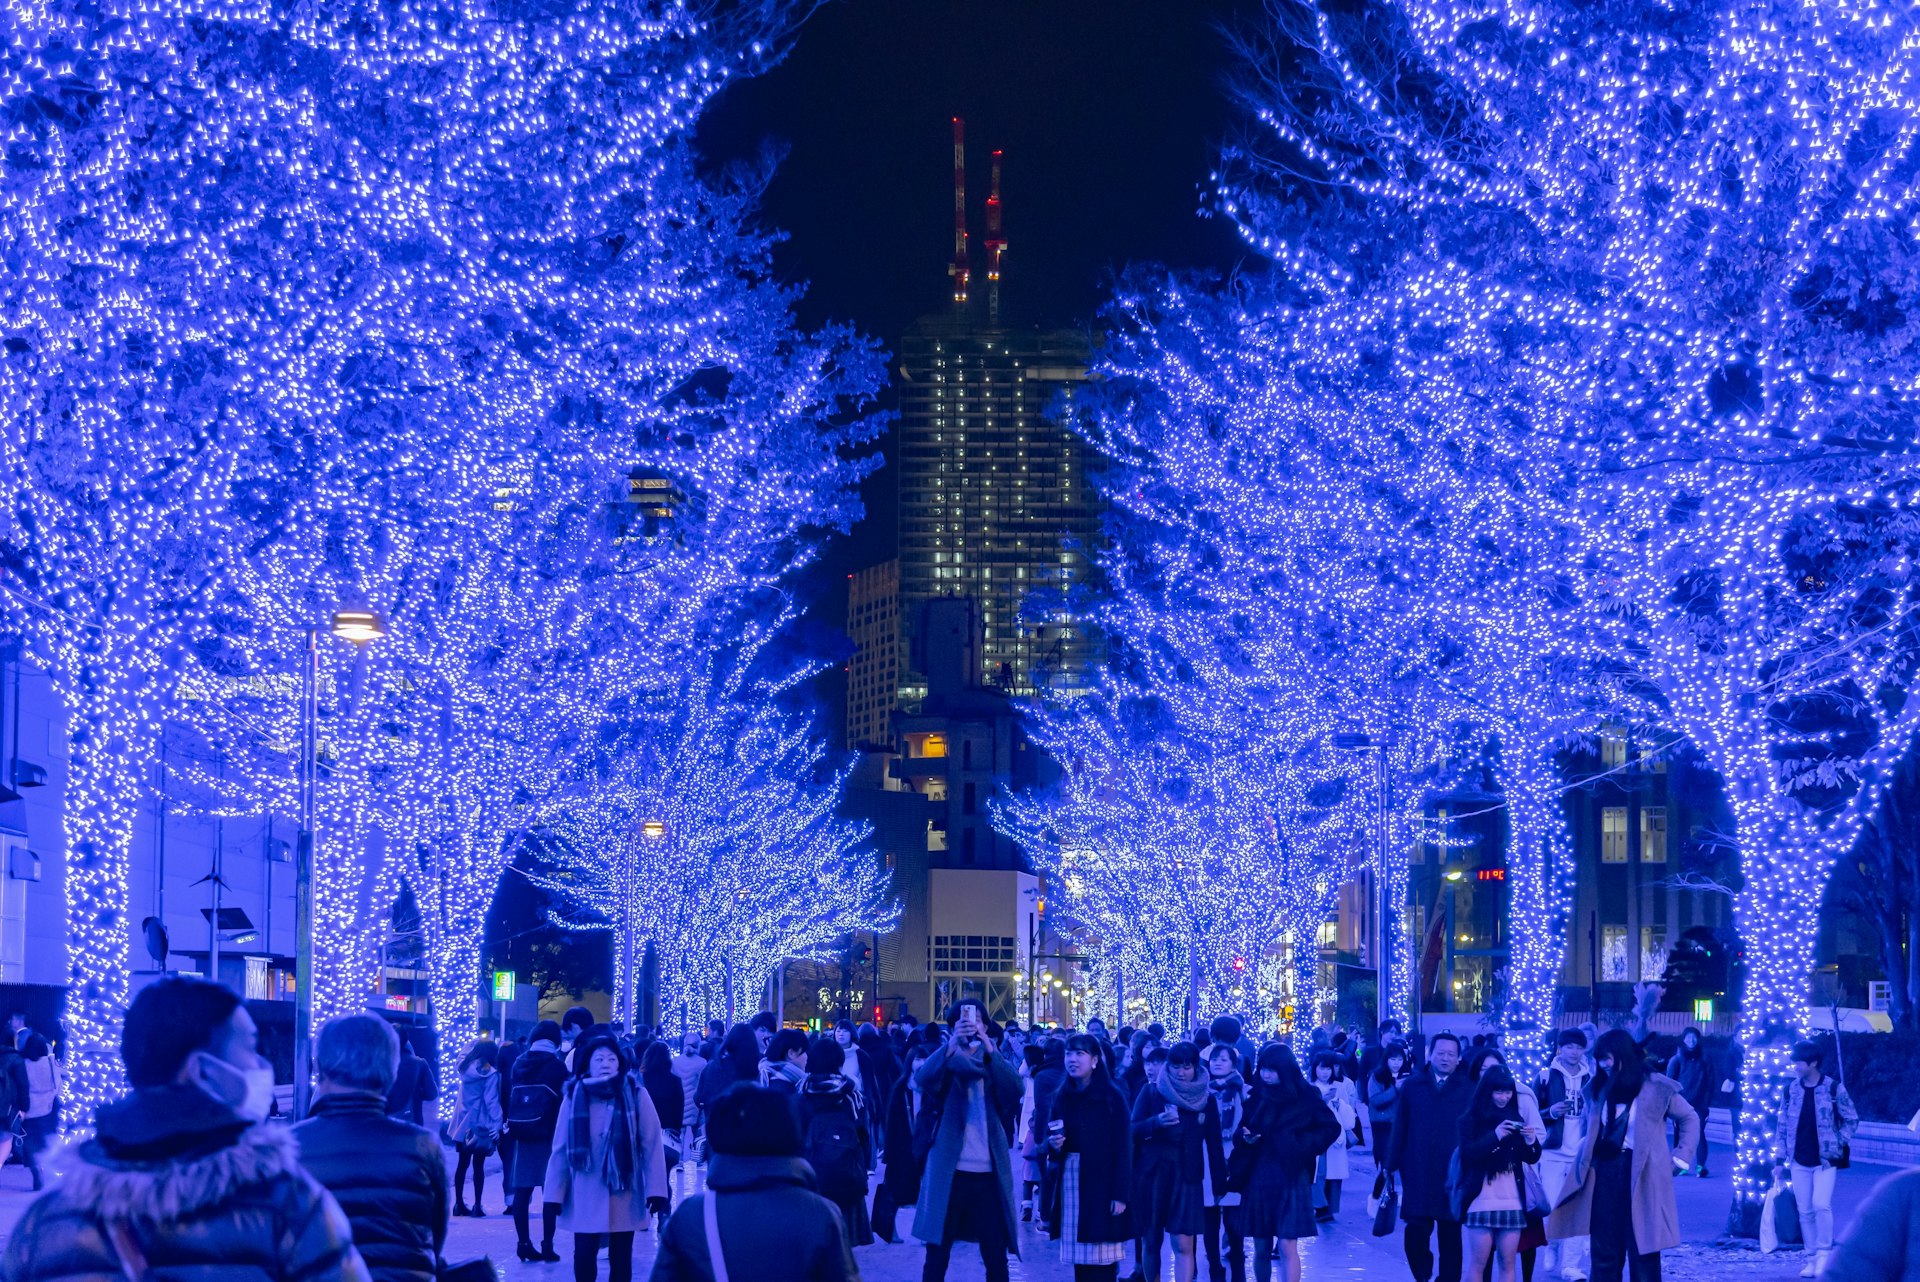 Hundreds of people walk between trees decorated with tiny blue lights in Shibuya, Tokyo 